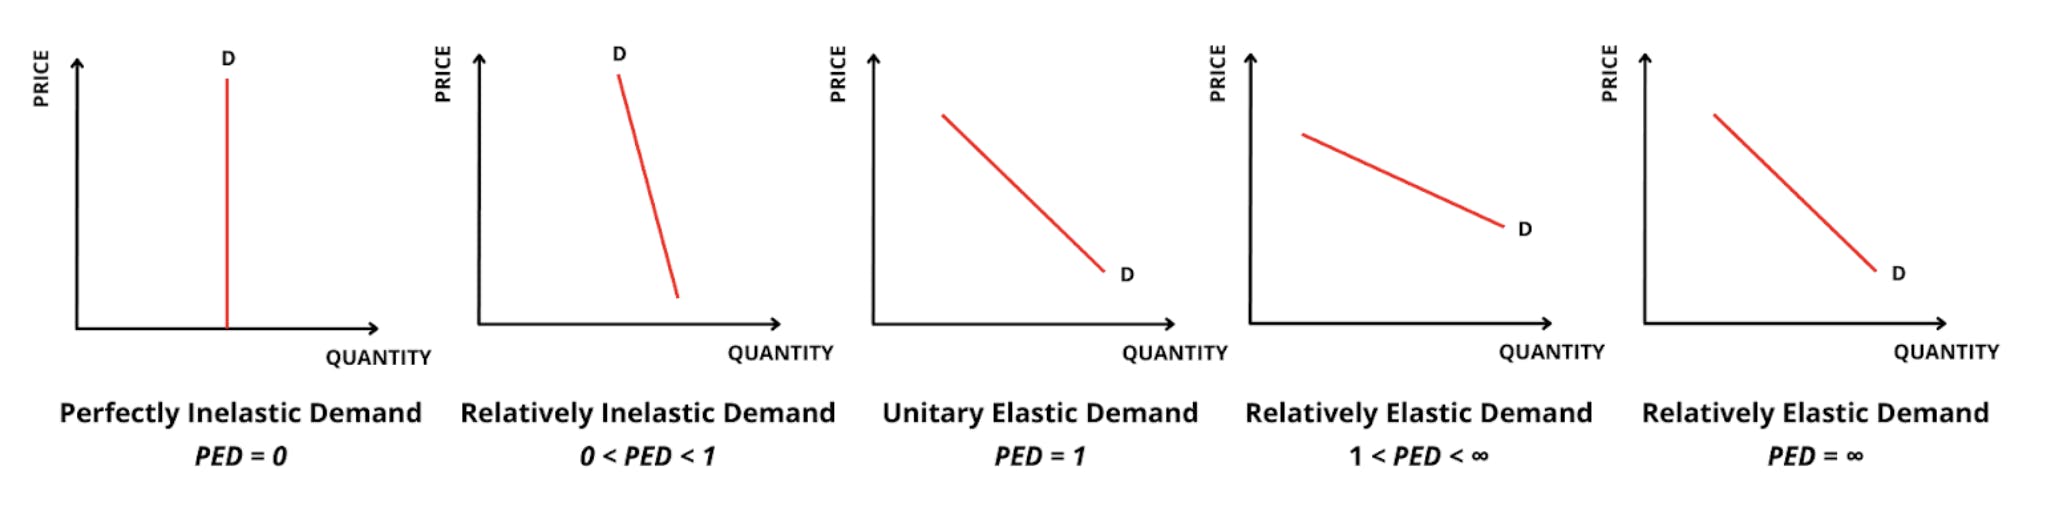 PED elasticities visualized